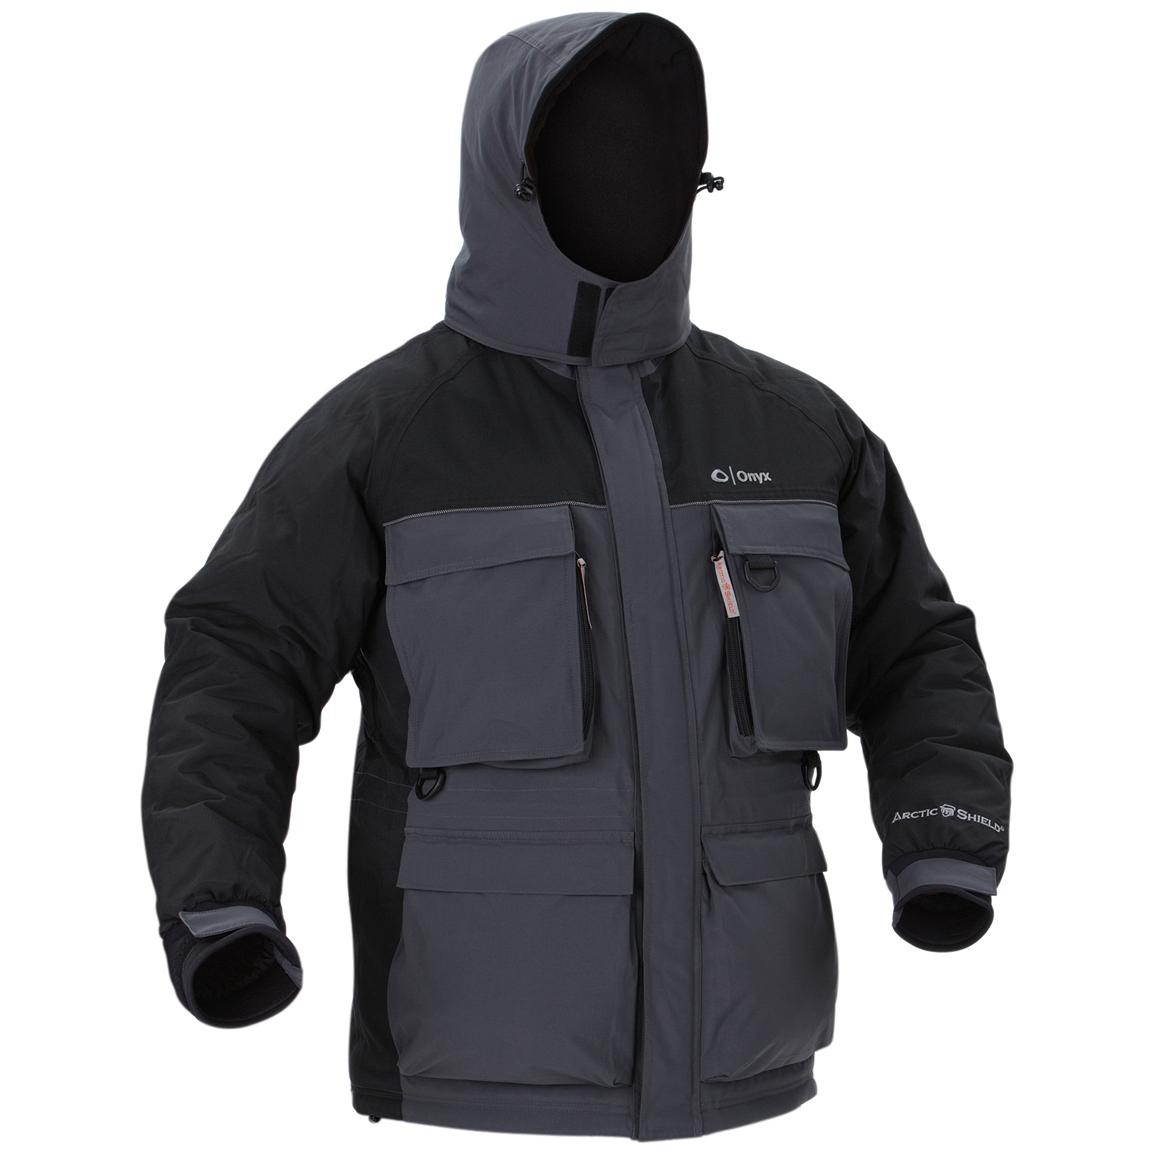 Onyx ArcticShield® Cold Weather Extreme Waterproof Insulated Parka